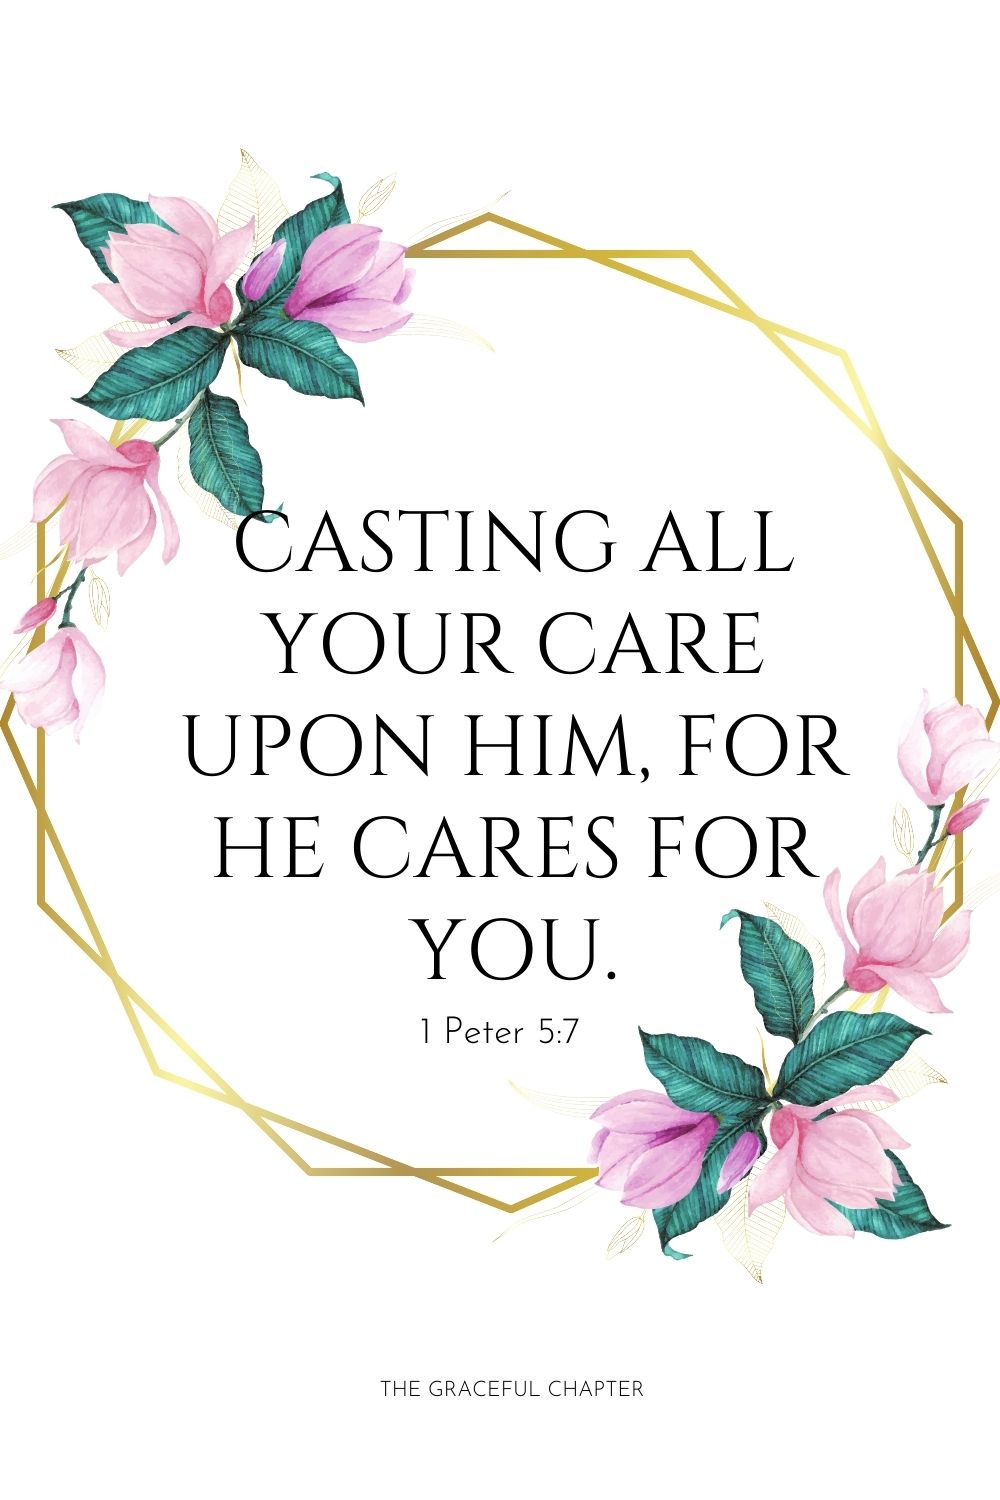  Casting all your care upon Him, for He cares for you. 1 Peter 5:7